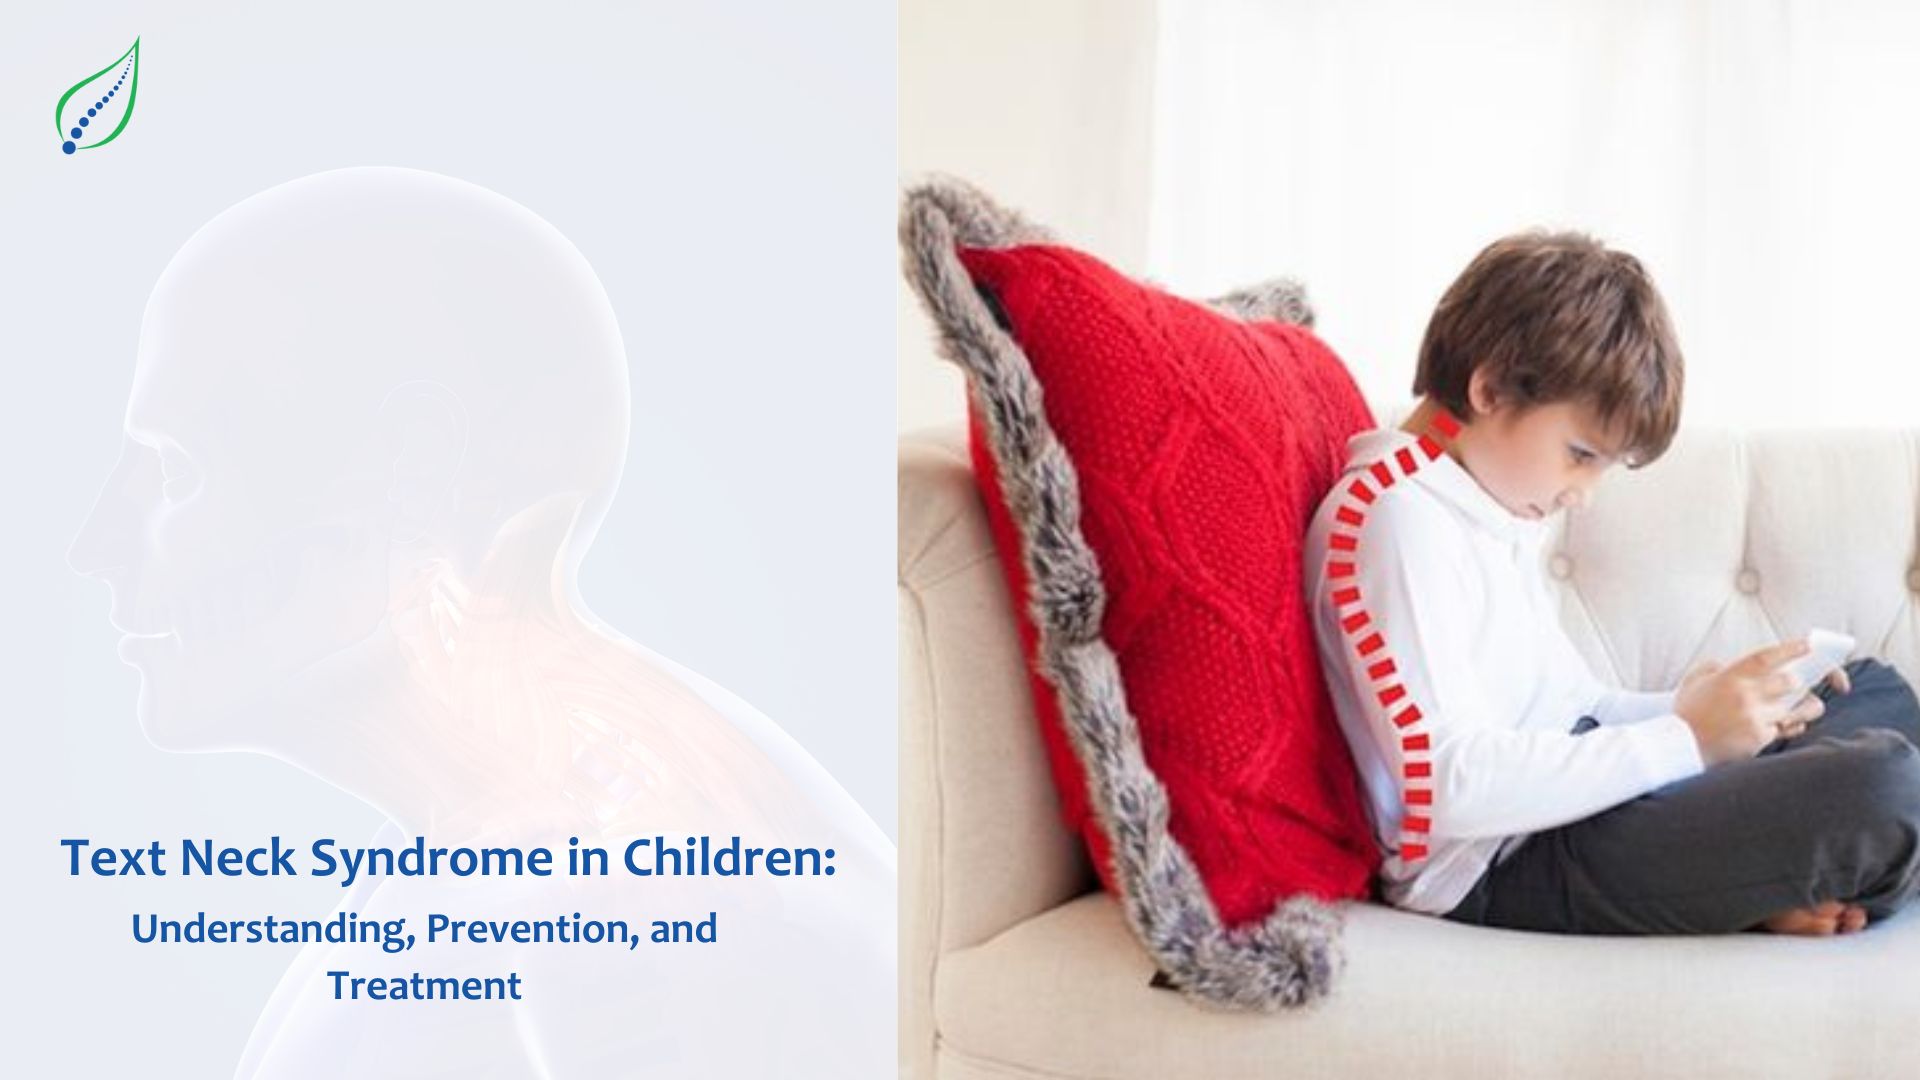 Text Neck Syndrome in Children: Understanding, Prevention, and Treatment